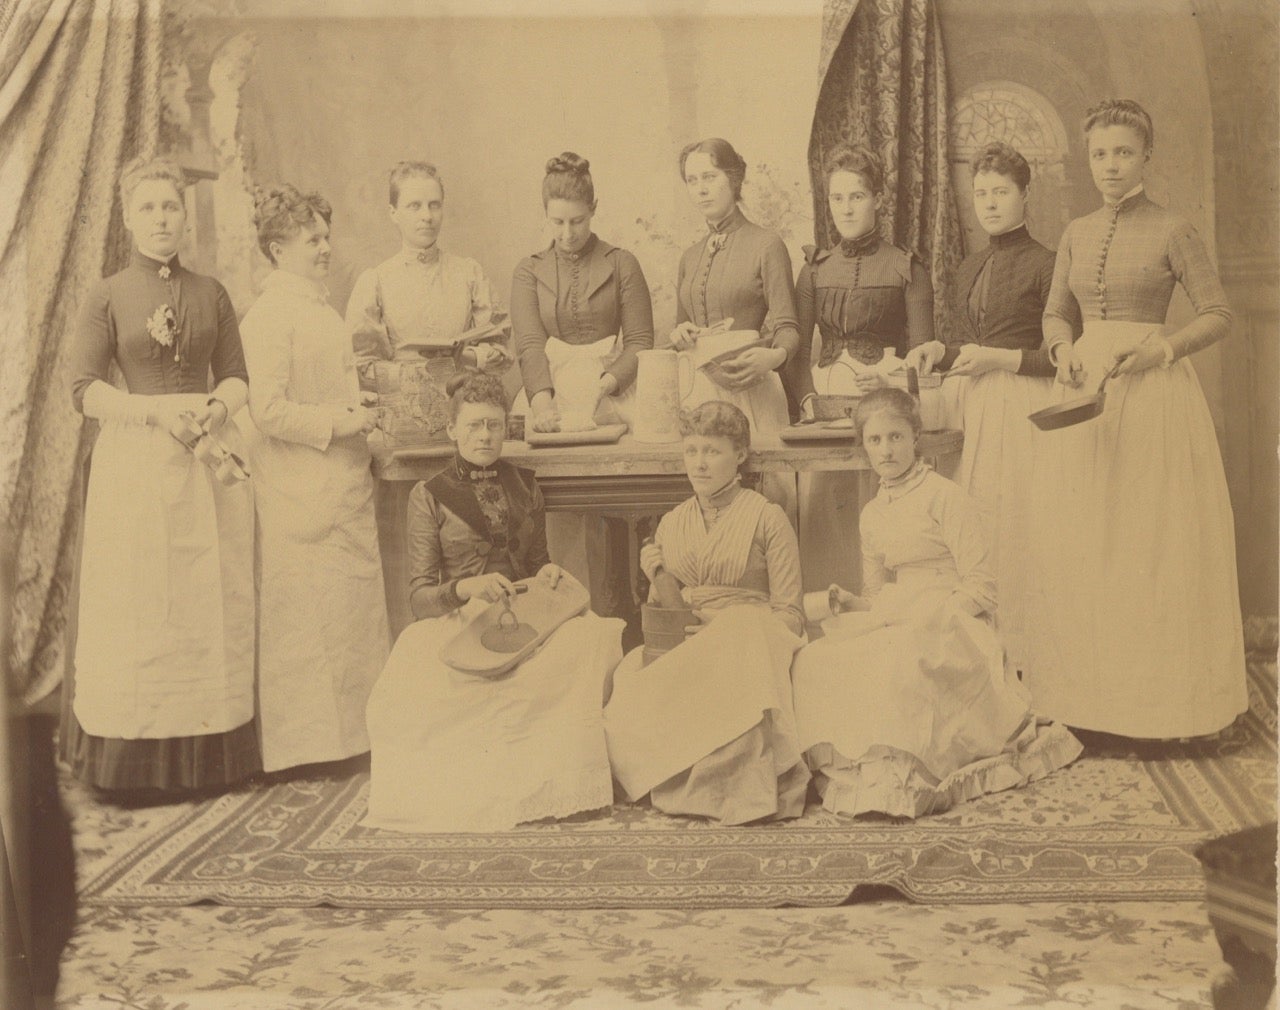 Item #6926 [Fannie Farmer and her classmates at the Boston Cooking School or at Miss Farmer's School of Cookery]. Fannie Farmer, Elmer Chickering, photographer.